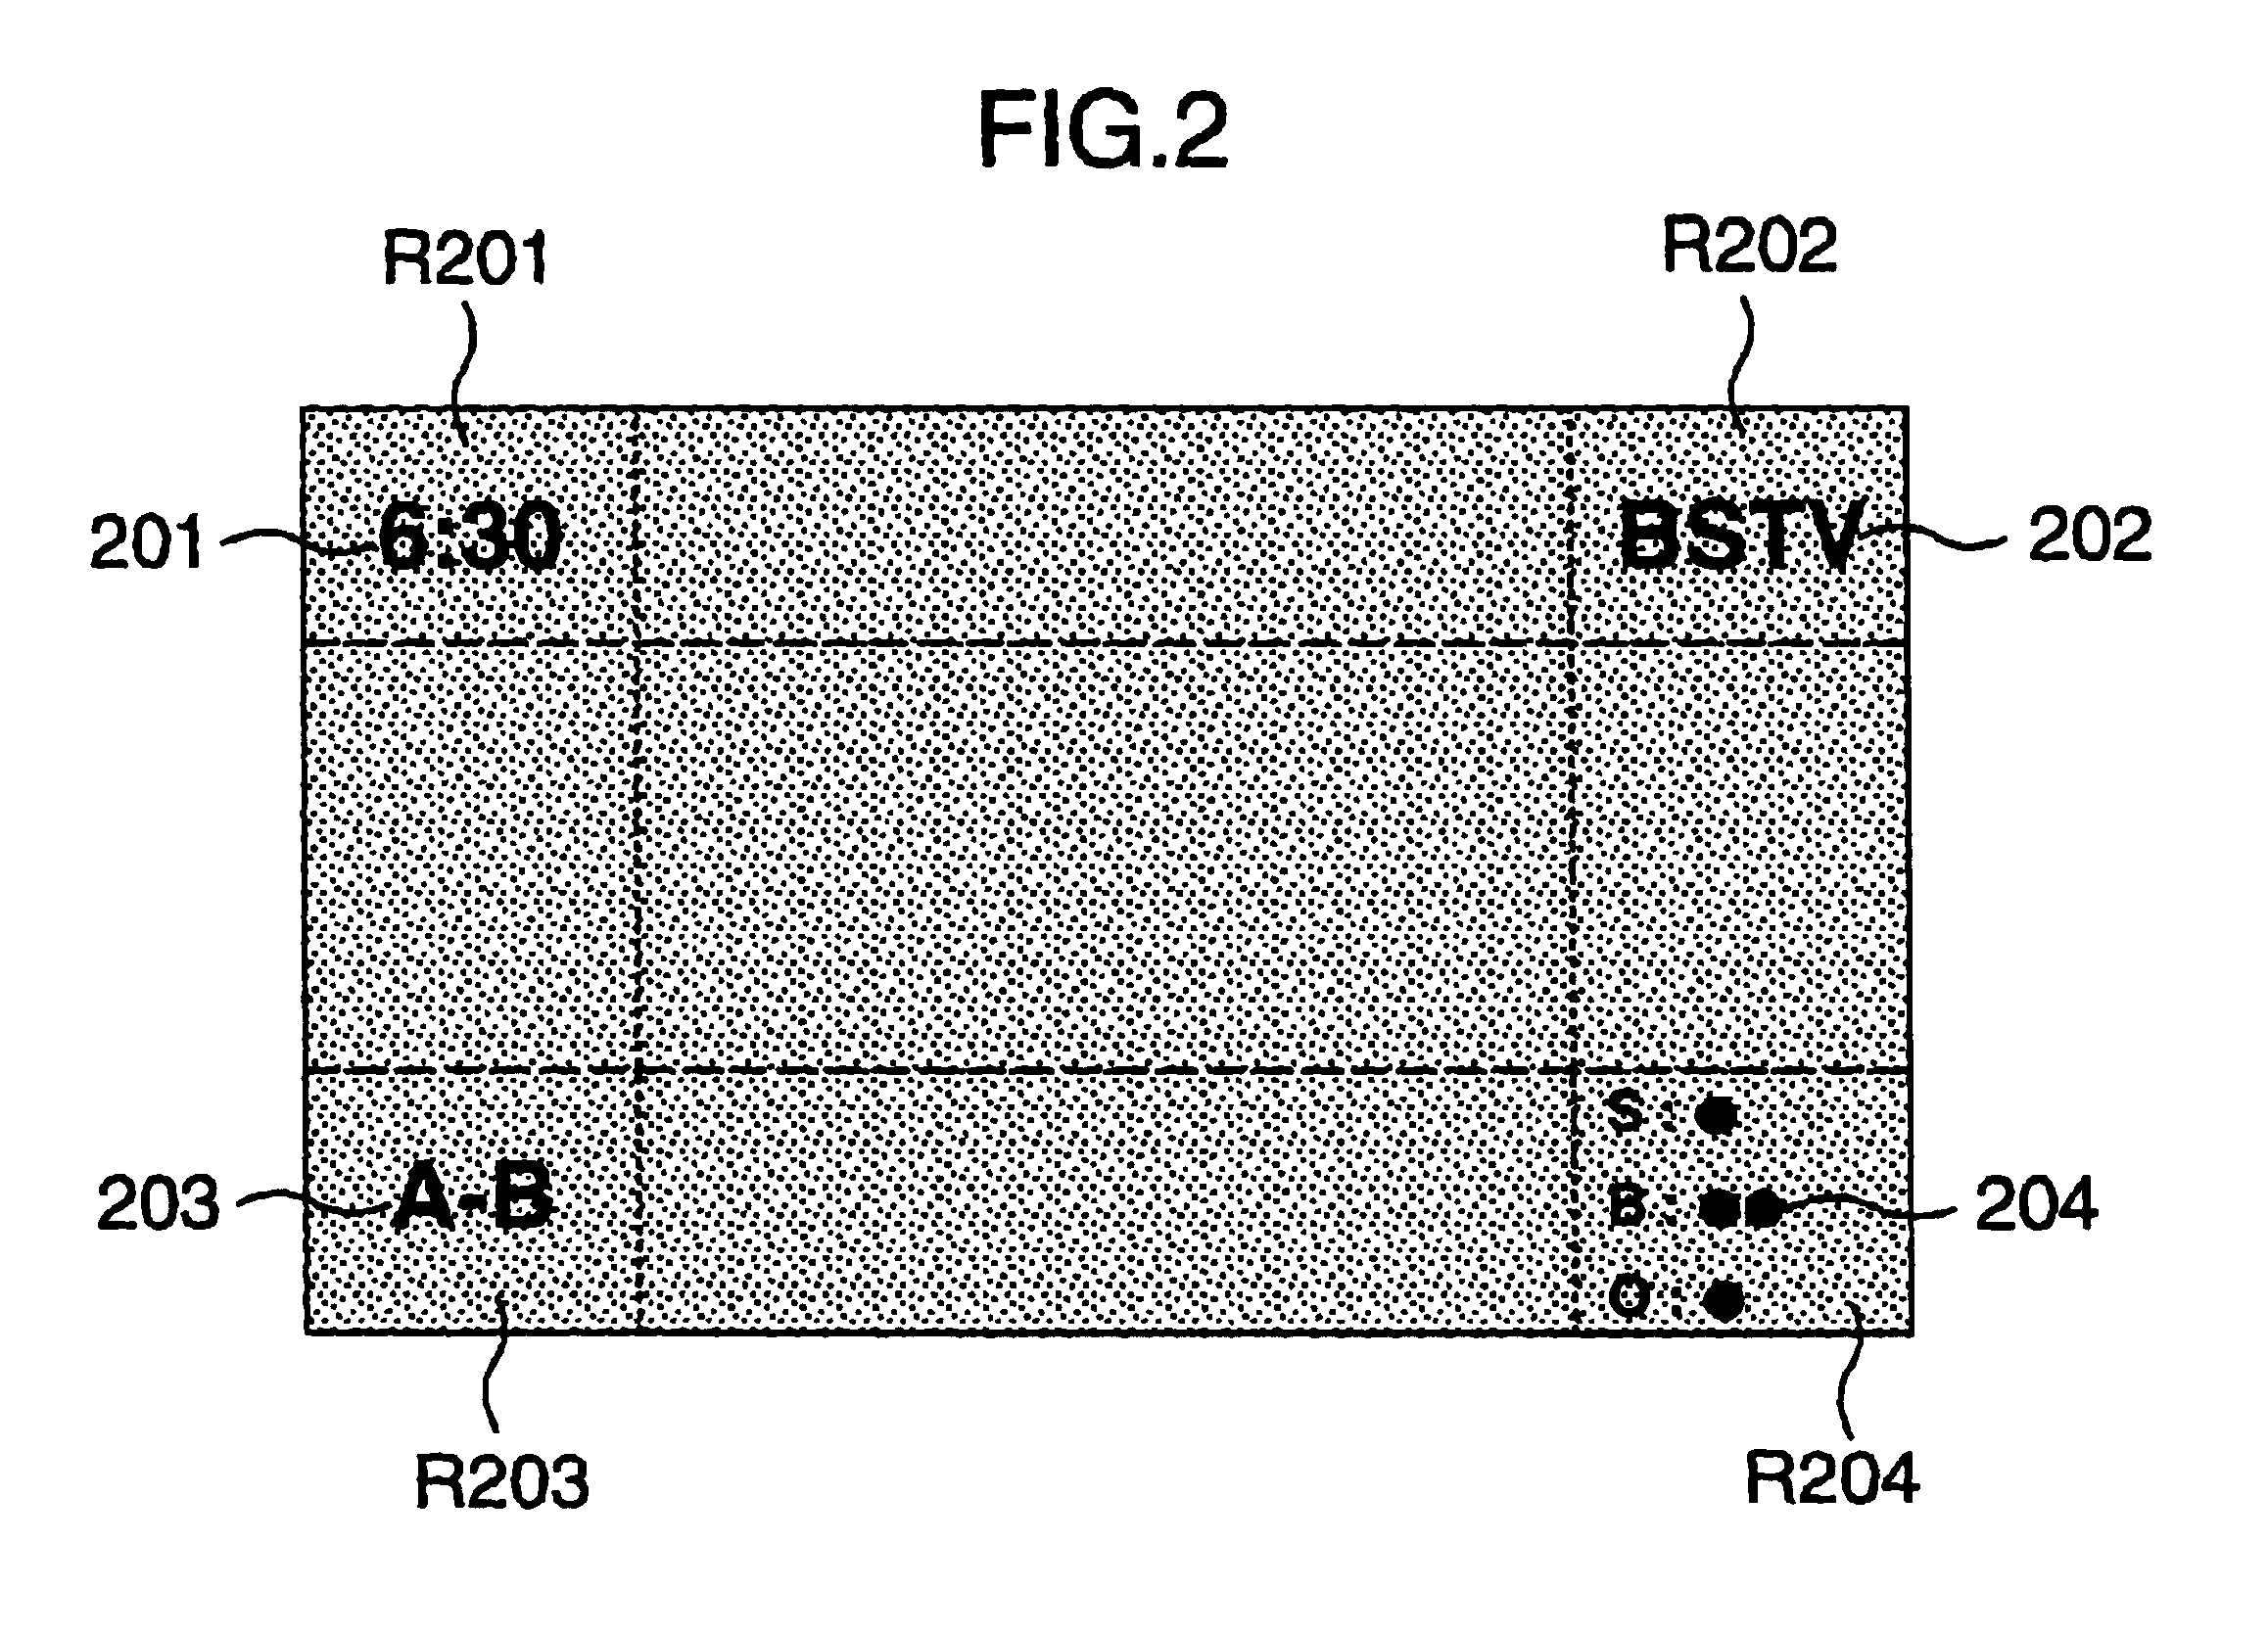 Image display device and method of displaying images with static image detection